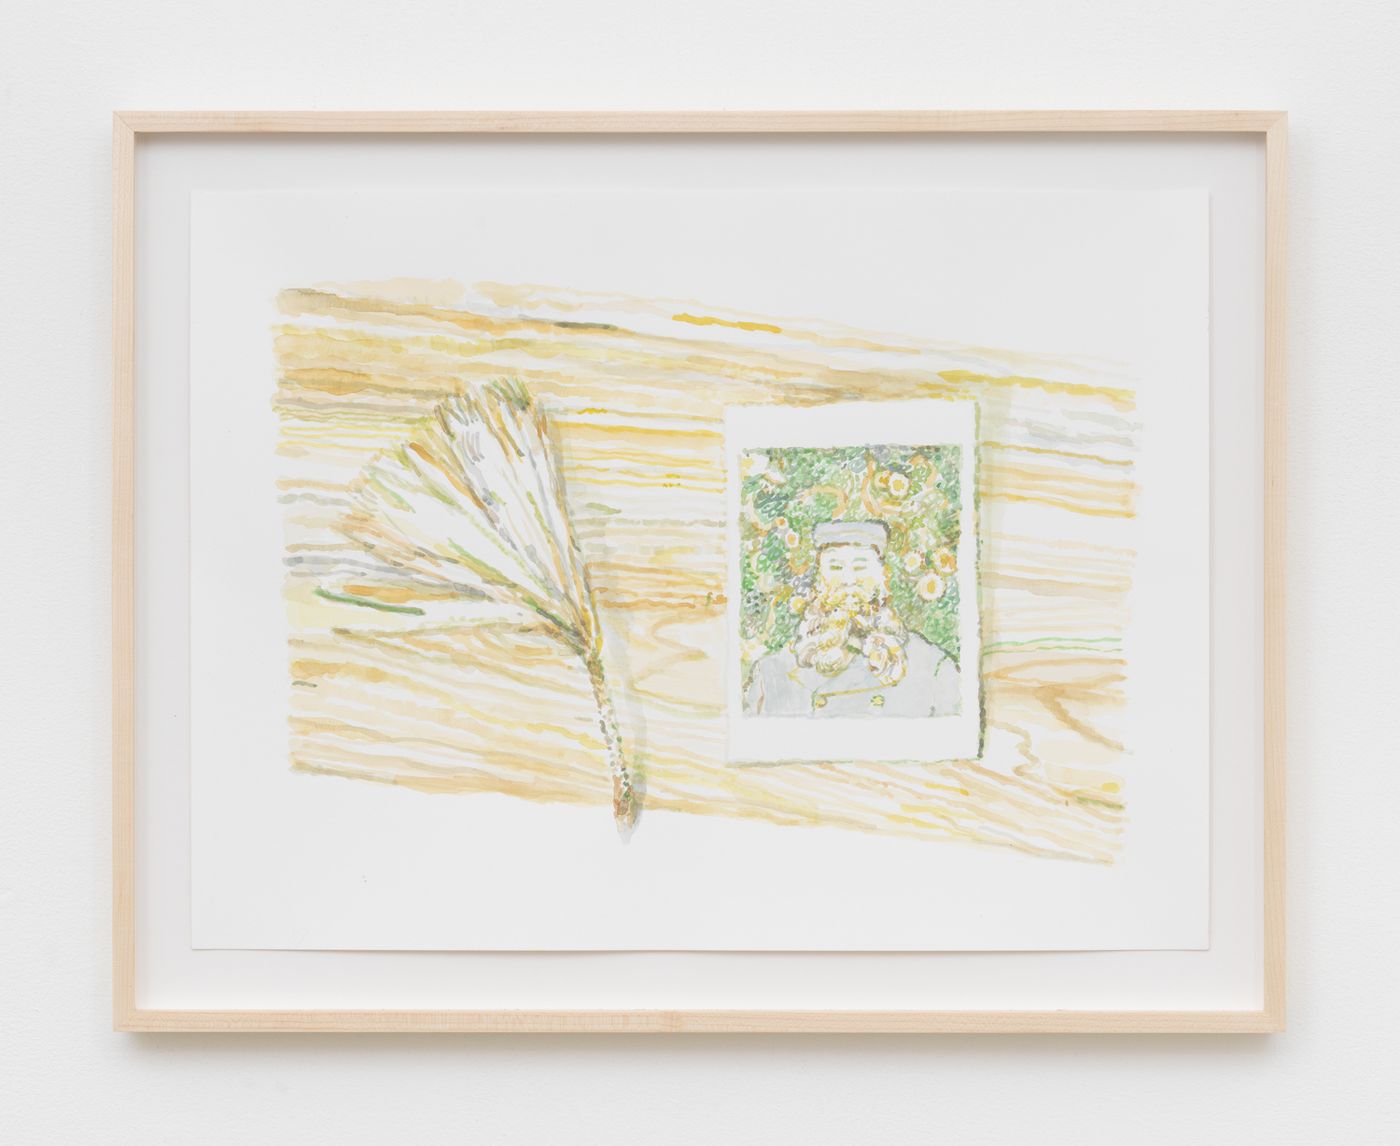 Image of Van Gogh and pine branch, 2022: Watercolor on paper